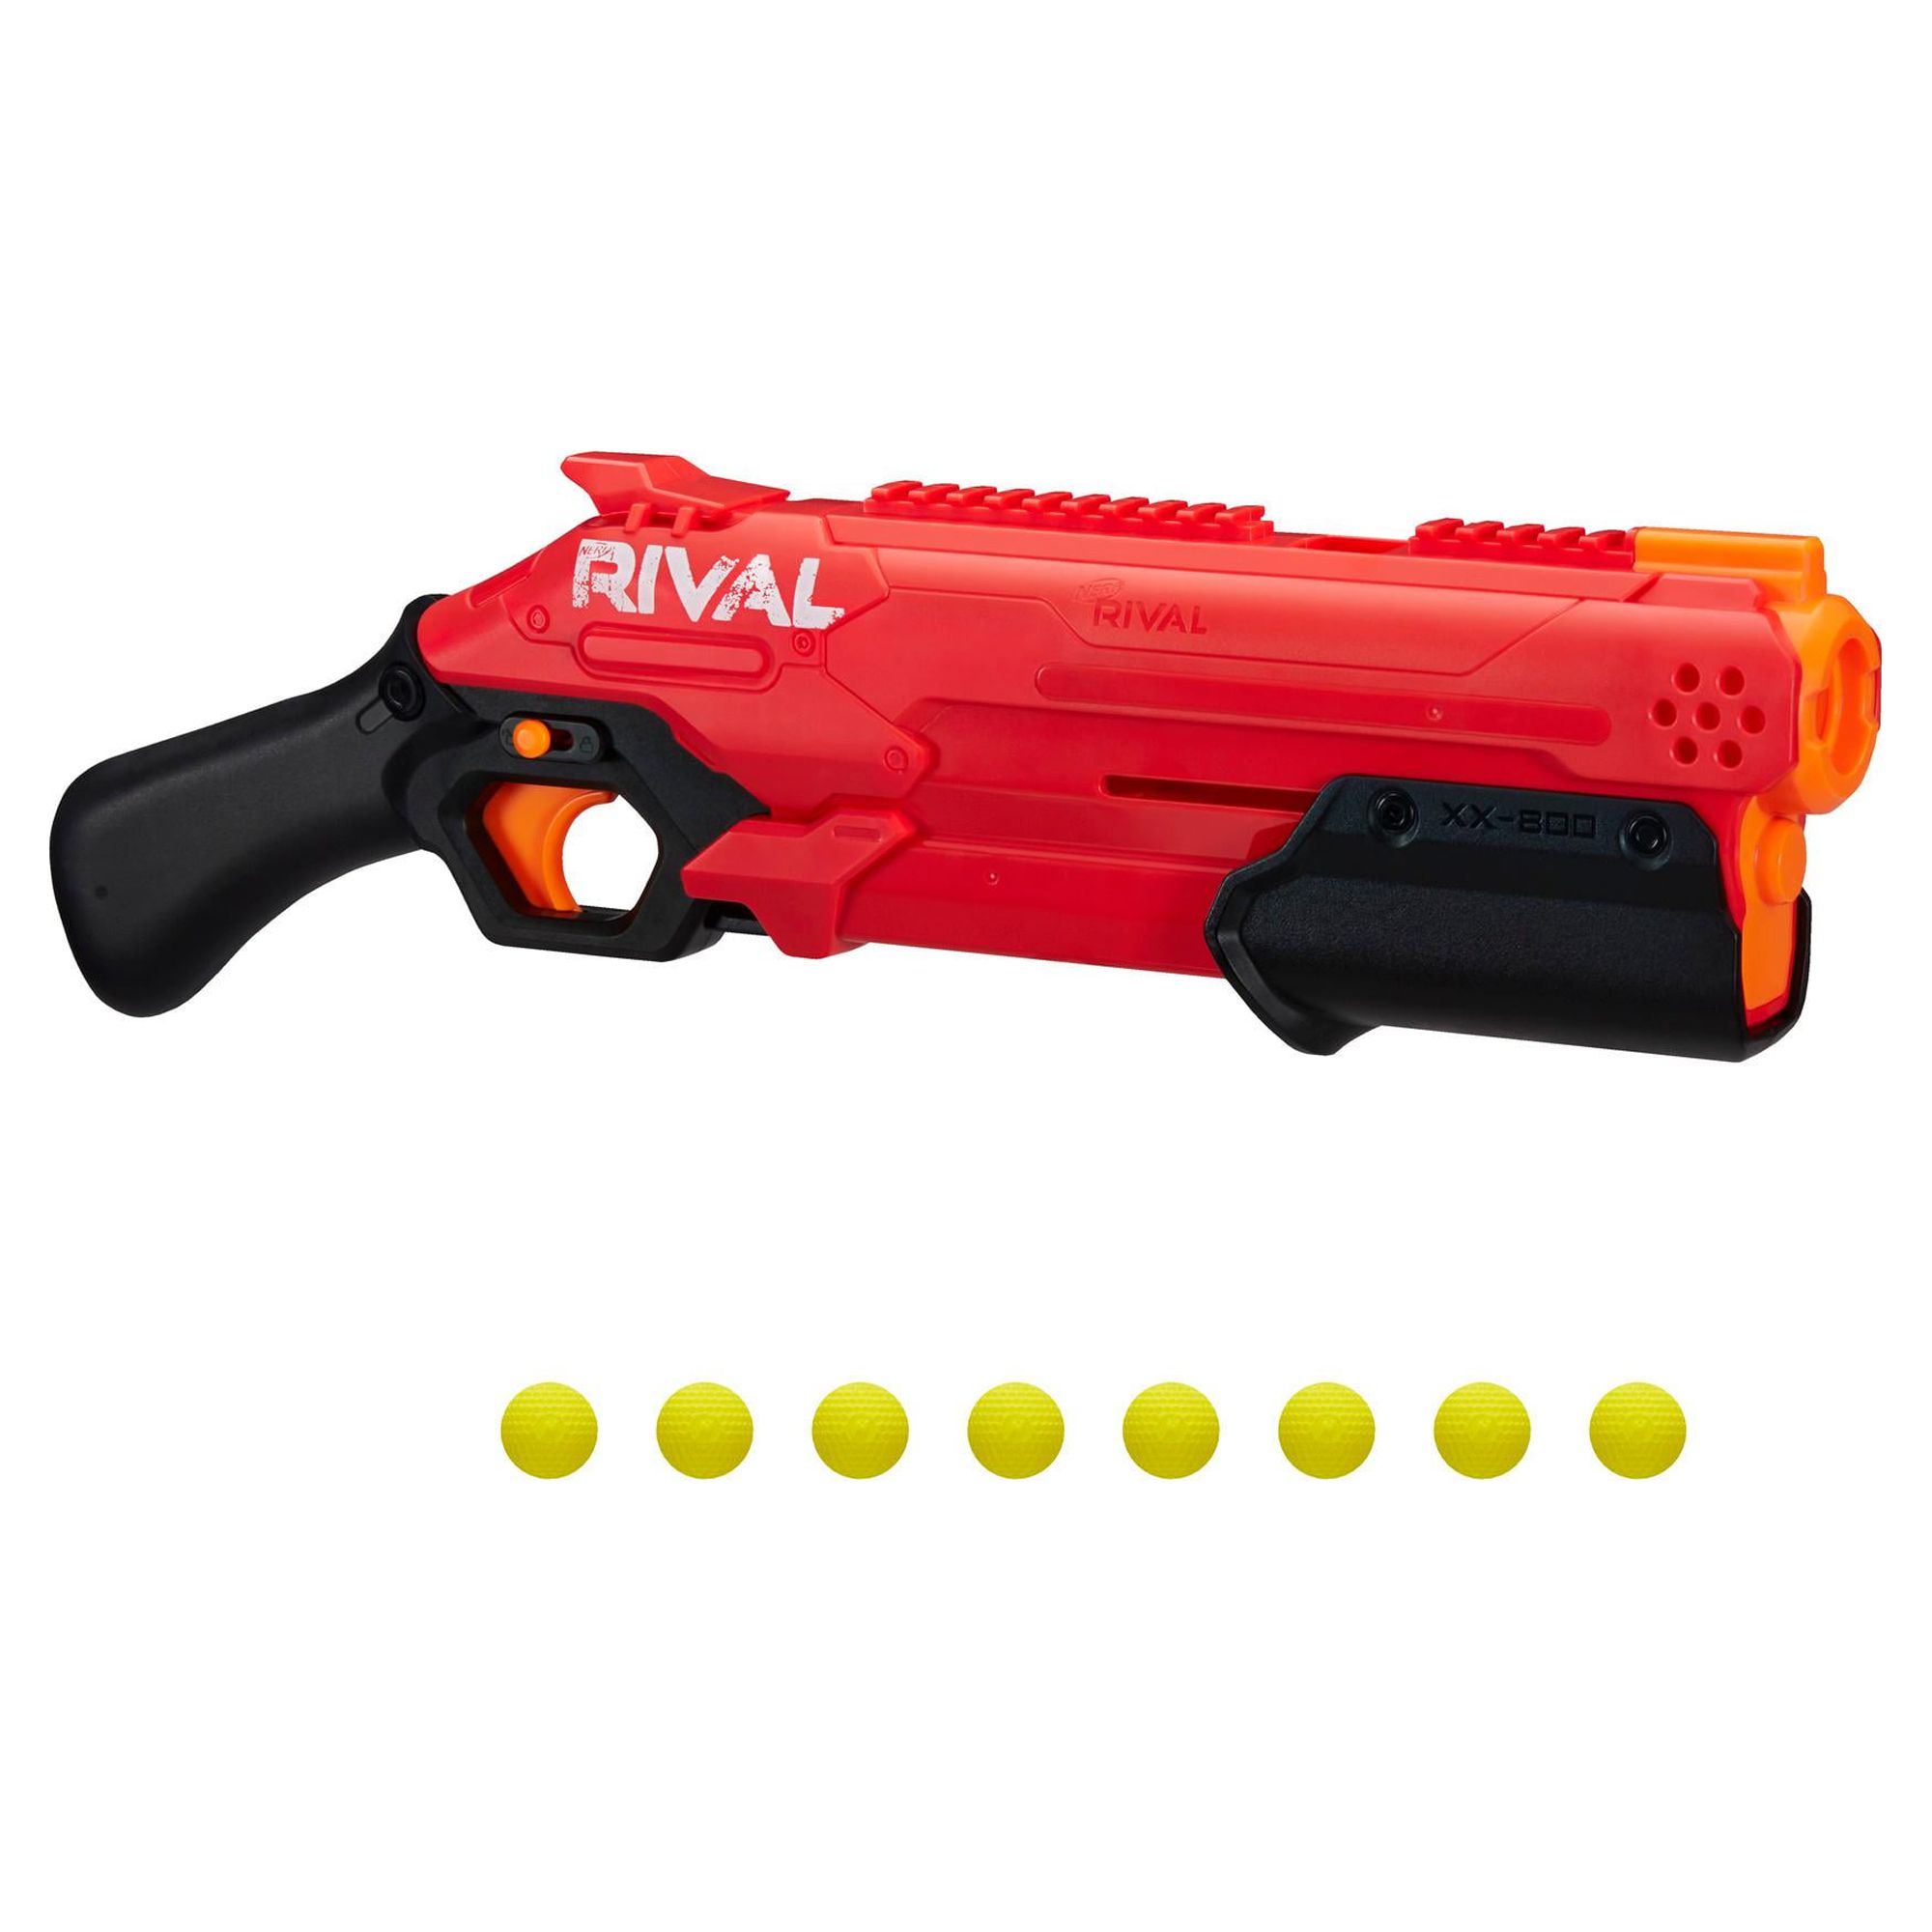 Nerf Rival Takedown XX-800 Blaster -- Pump Action, Breech-Load, 8-Round Capacity, 90 FPS, 8 Nerf Rival Rounds, Team Red - image 1 of 3